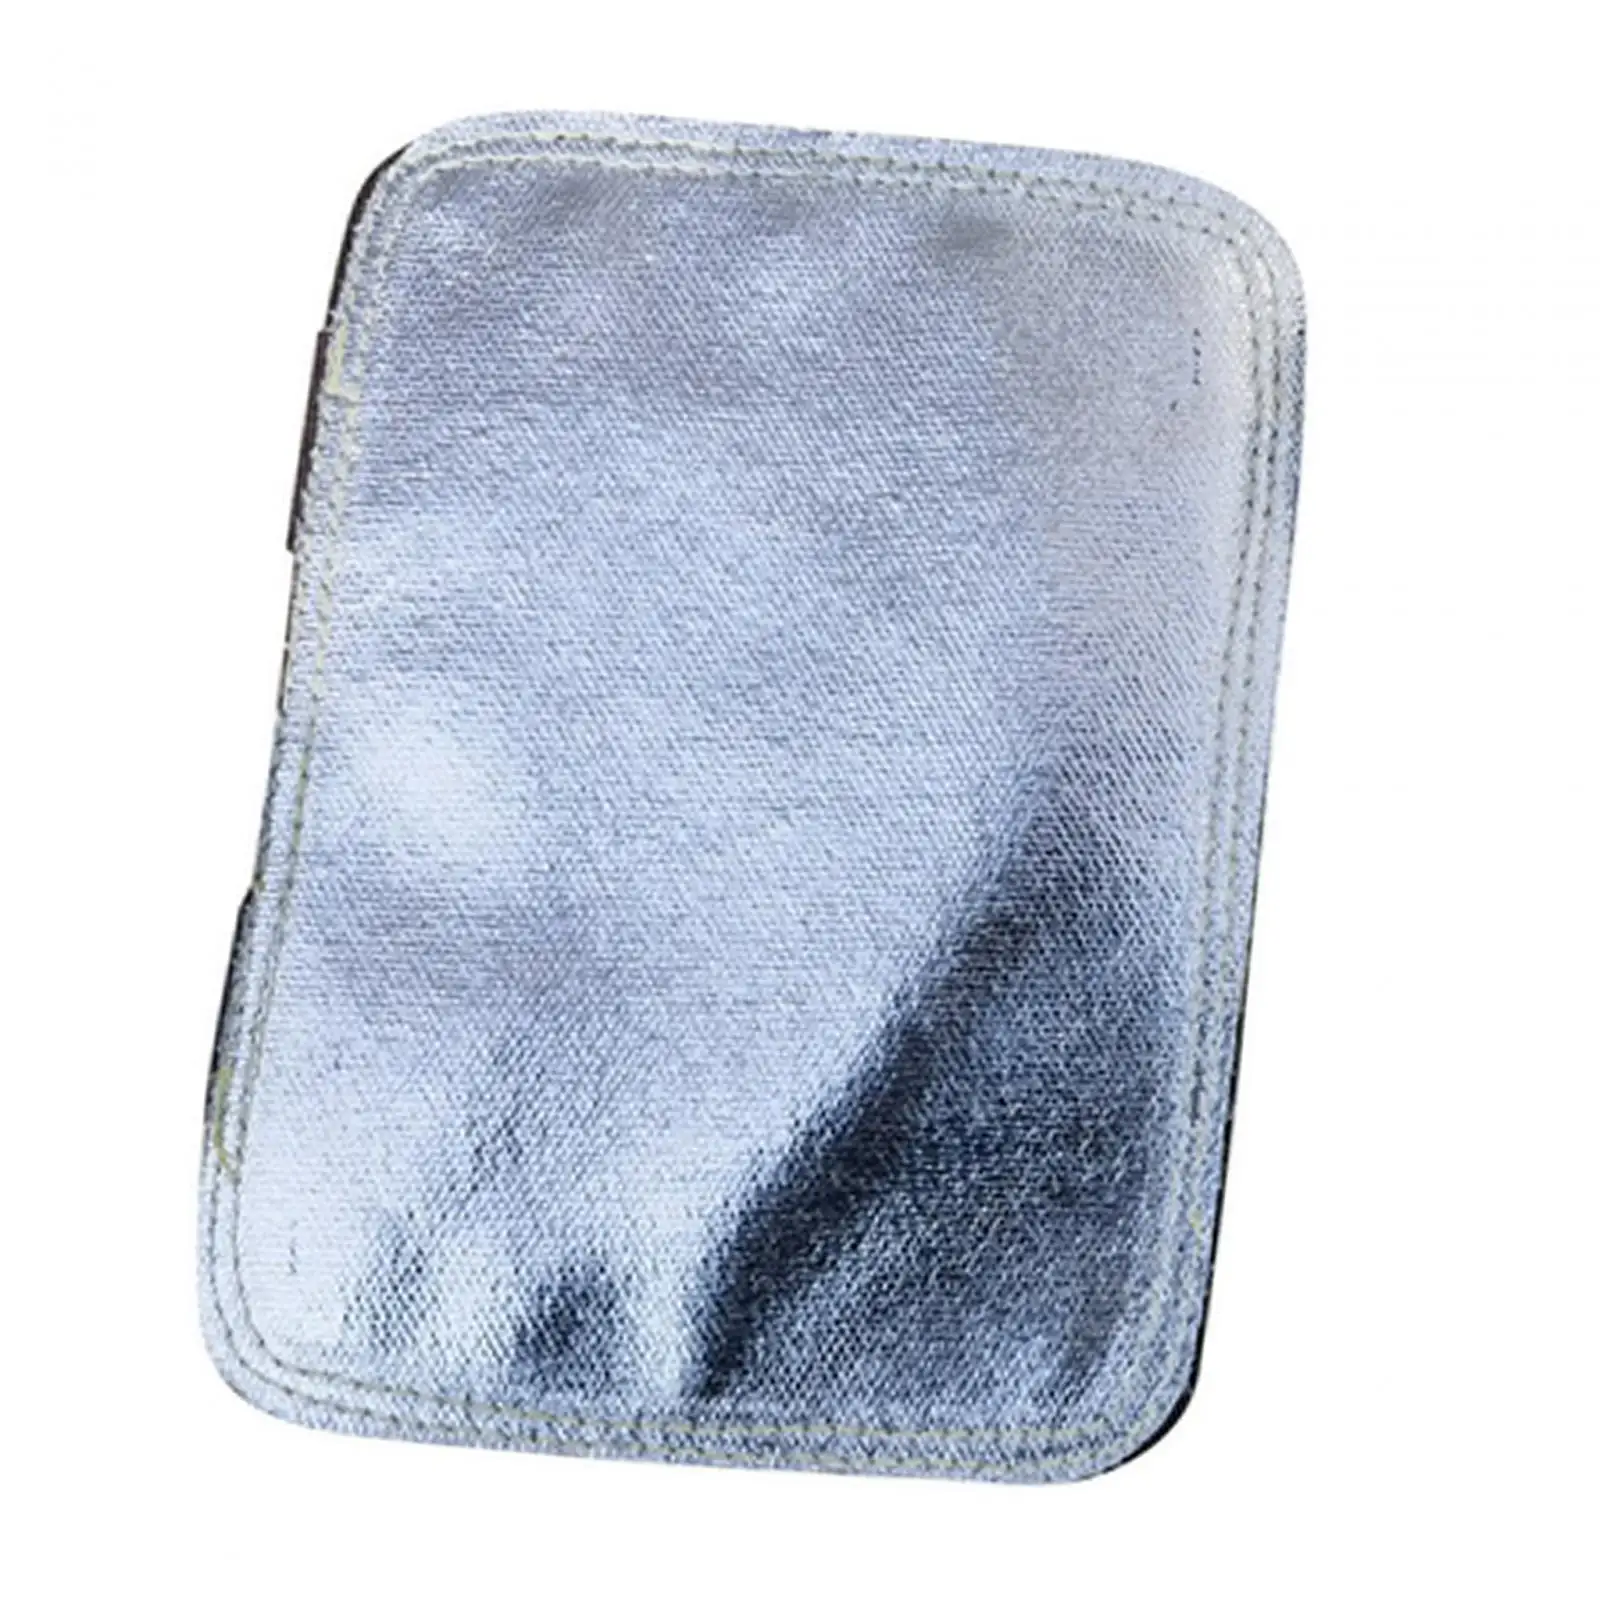 Welding Hand Pad High Temperature Resistant PU Leather Heat for Welder Furnace Industrial Boiler Metal Smelting Camping Welding